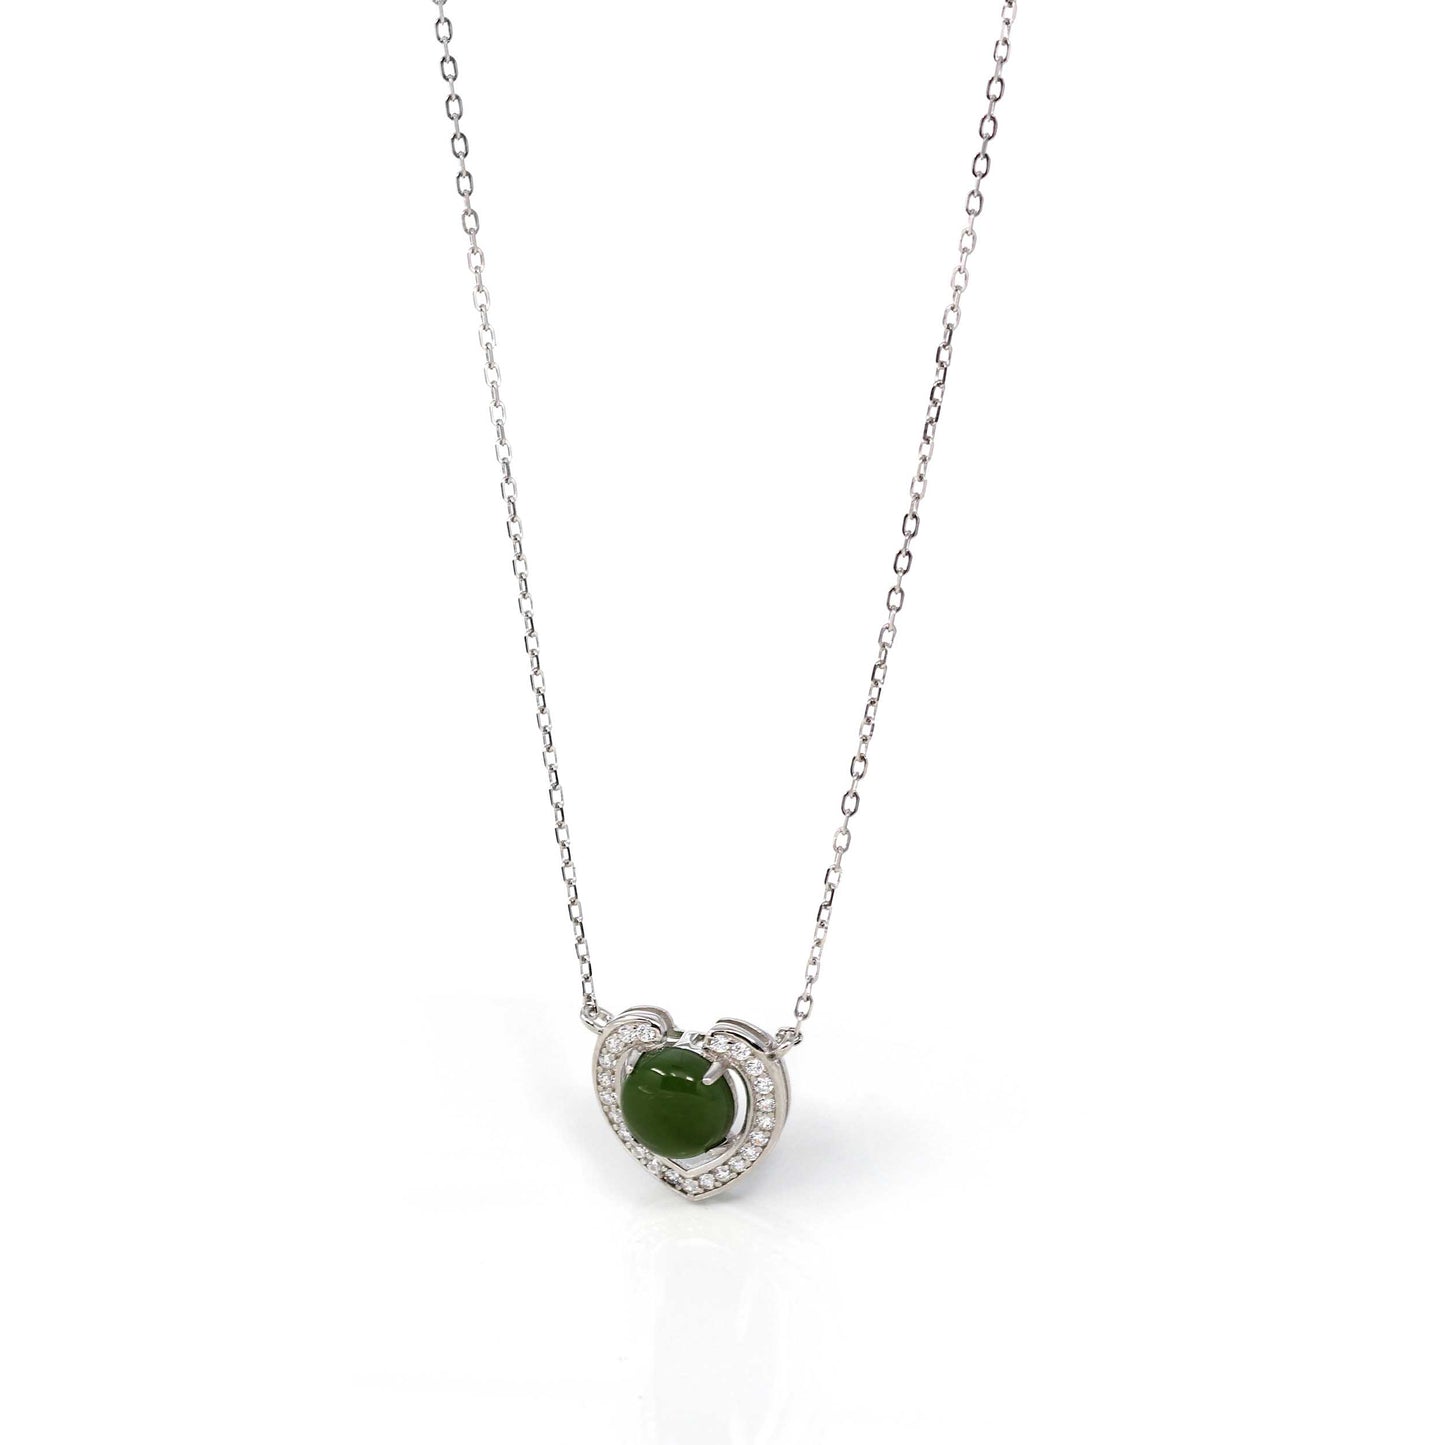 RealJade® Co. Sterling Silver Real Green Nephrite Jade Love Pendant Necklace With CZ